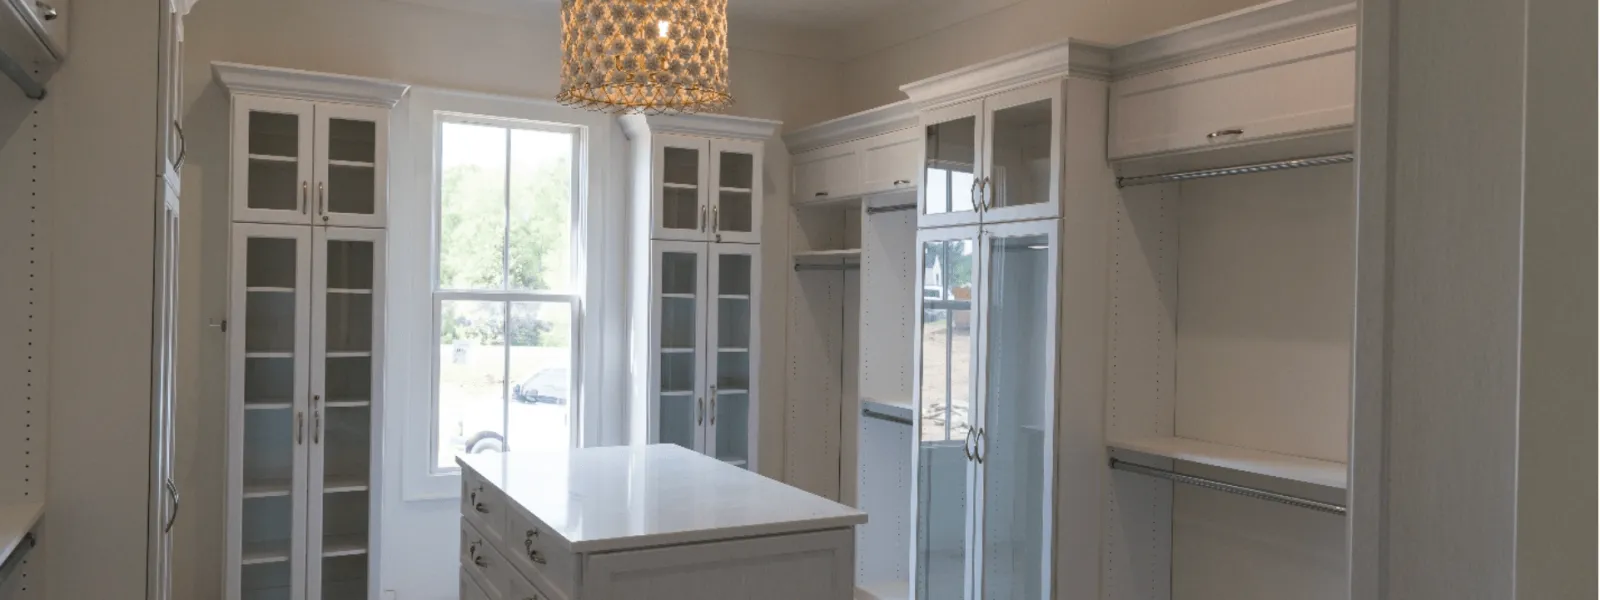 White cabinets and a chandelier